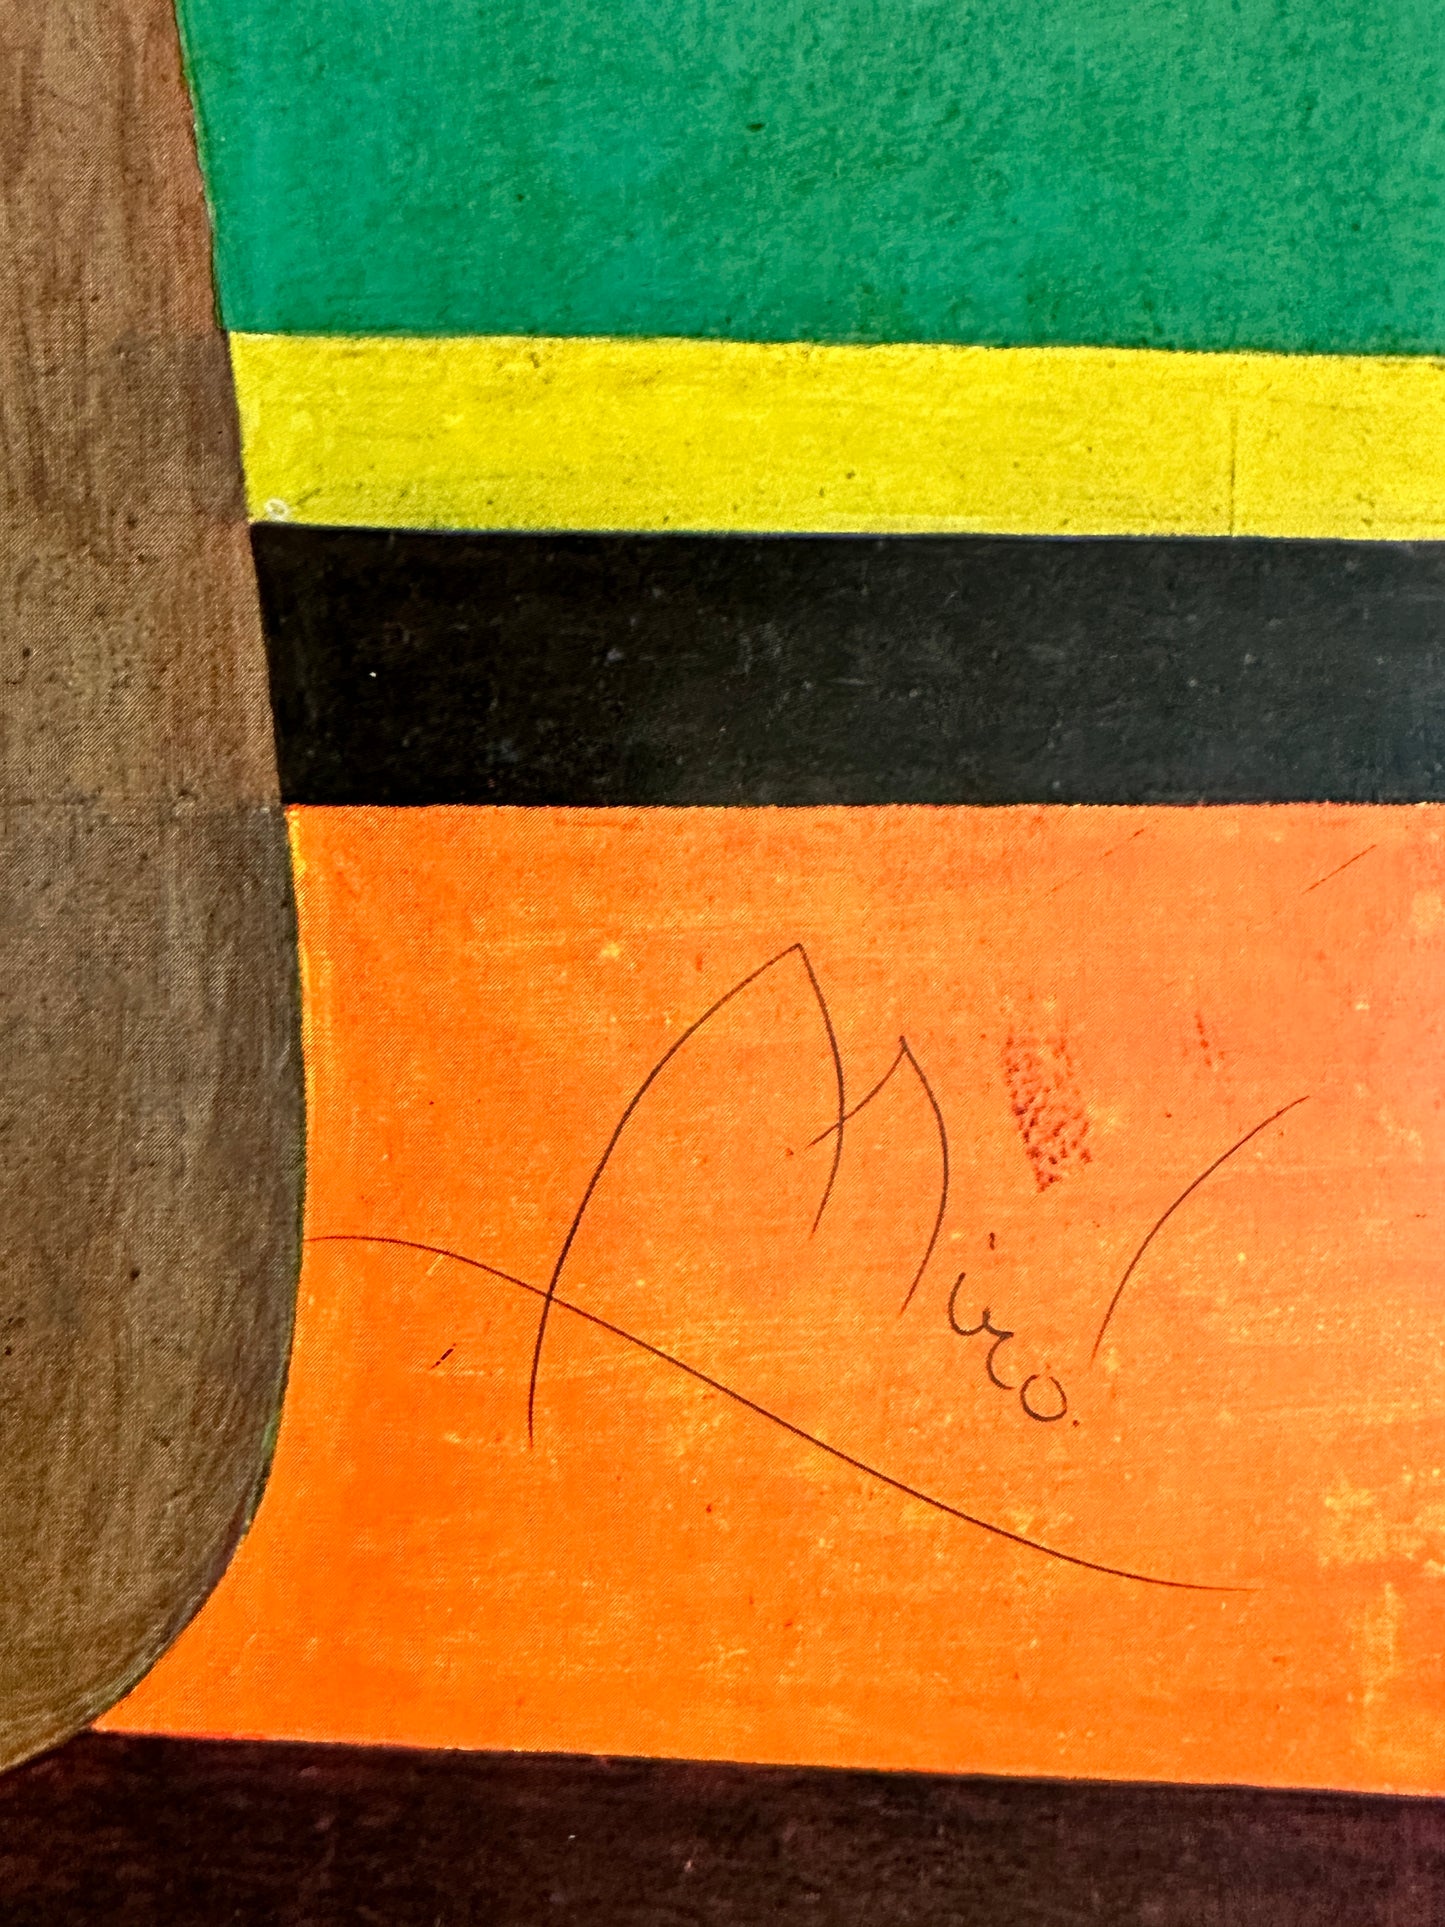 Joan Miro Exhibition Poster: Signed Galerie Melki Museum Poster